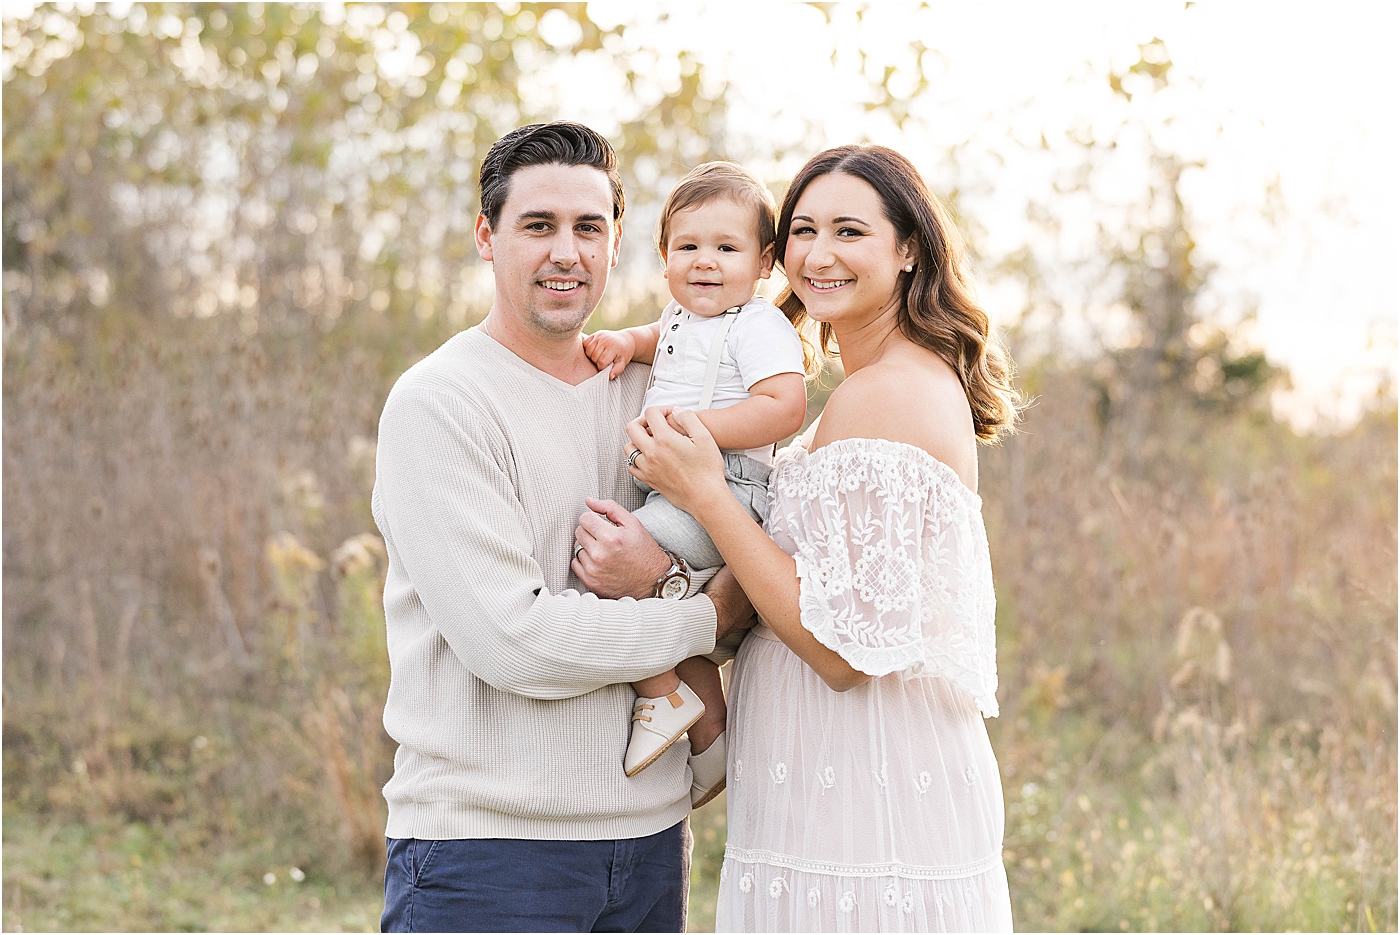 Family photos for sons first birthday session | Photo by Lindsay Konopa Photography